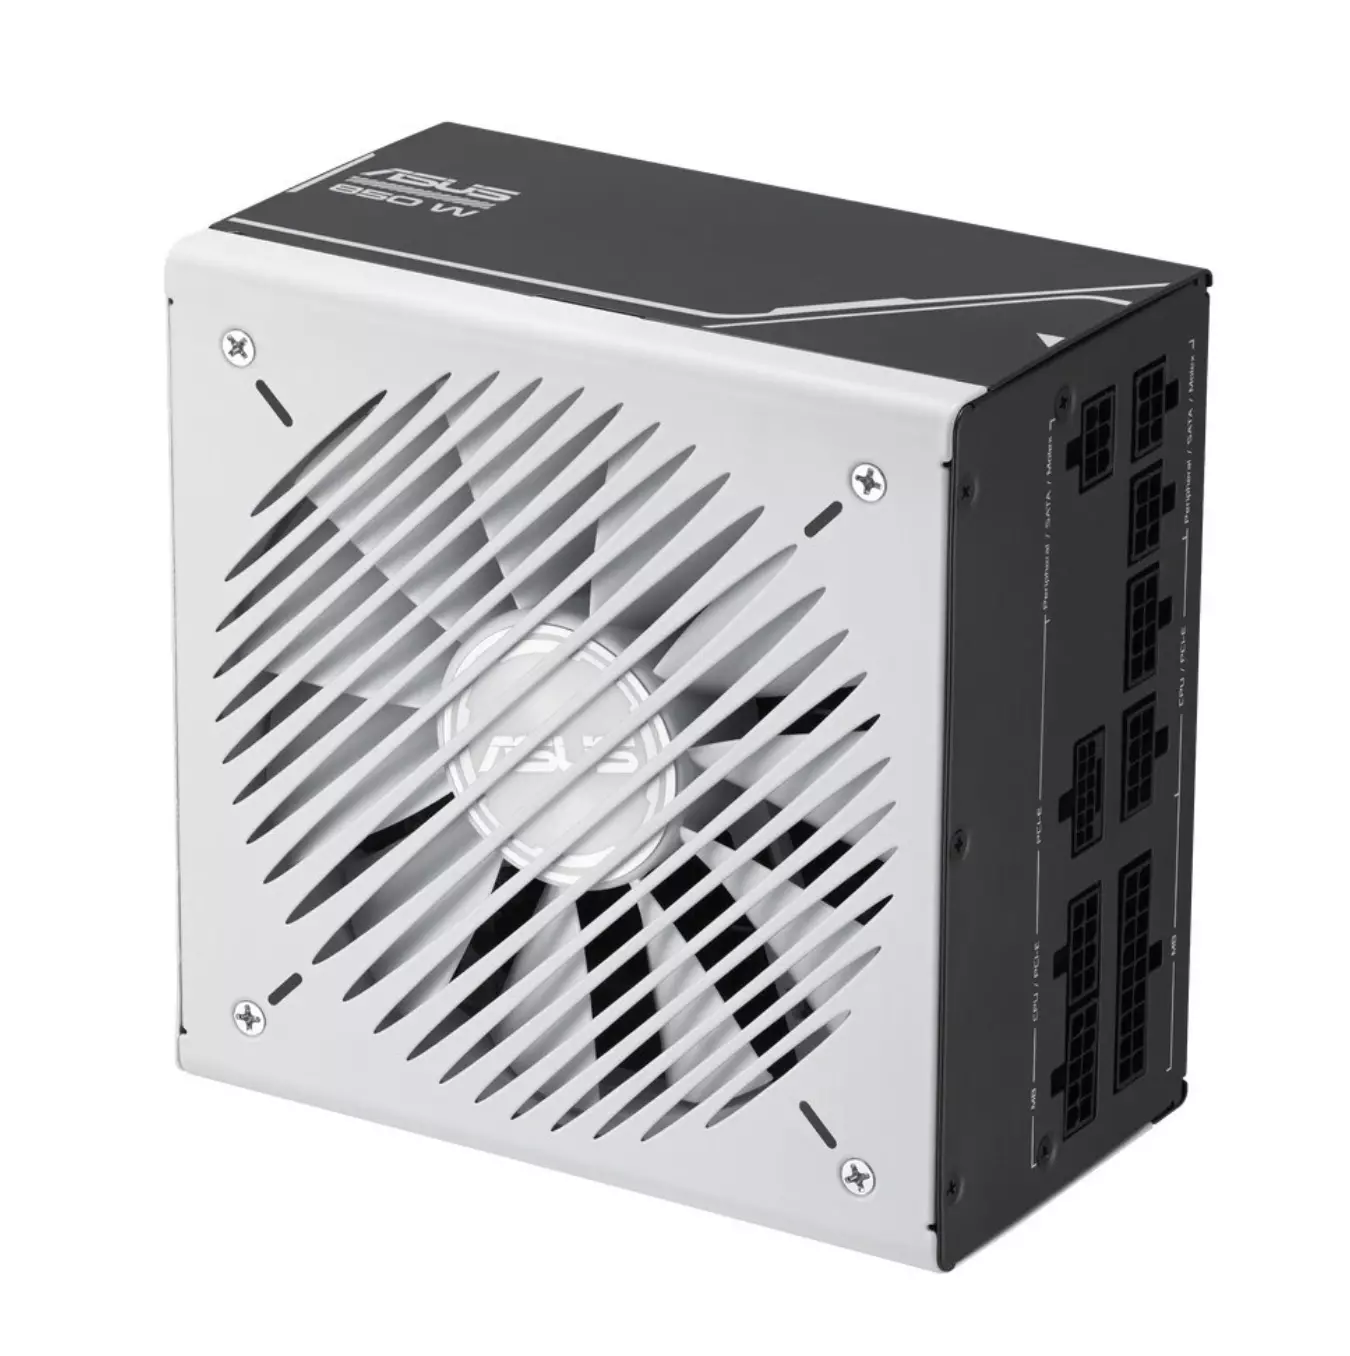 asus 850w power supply prime series